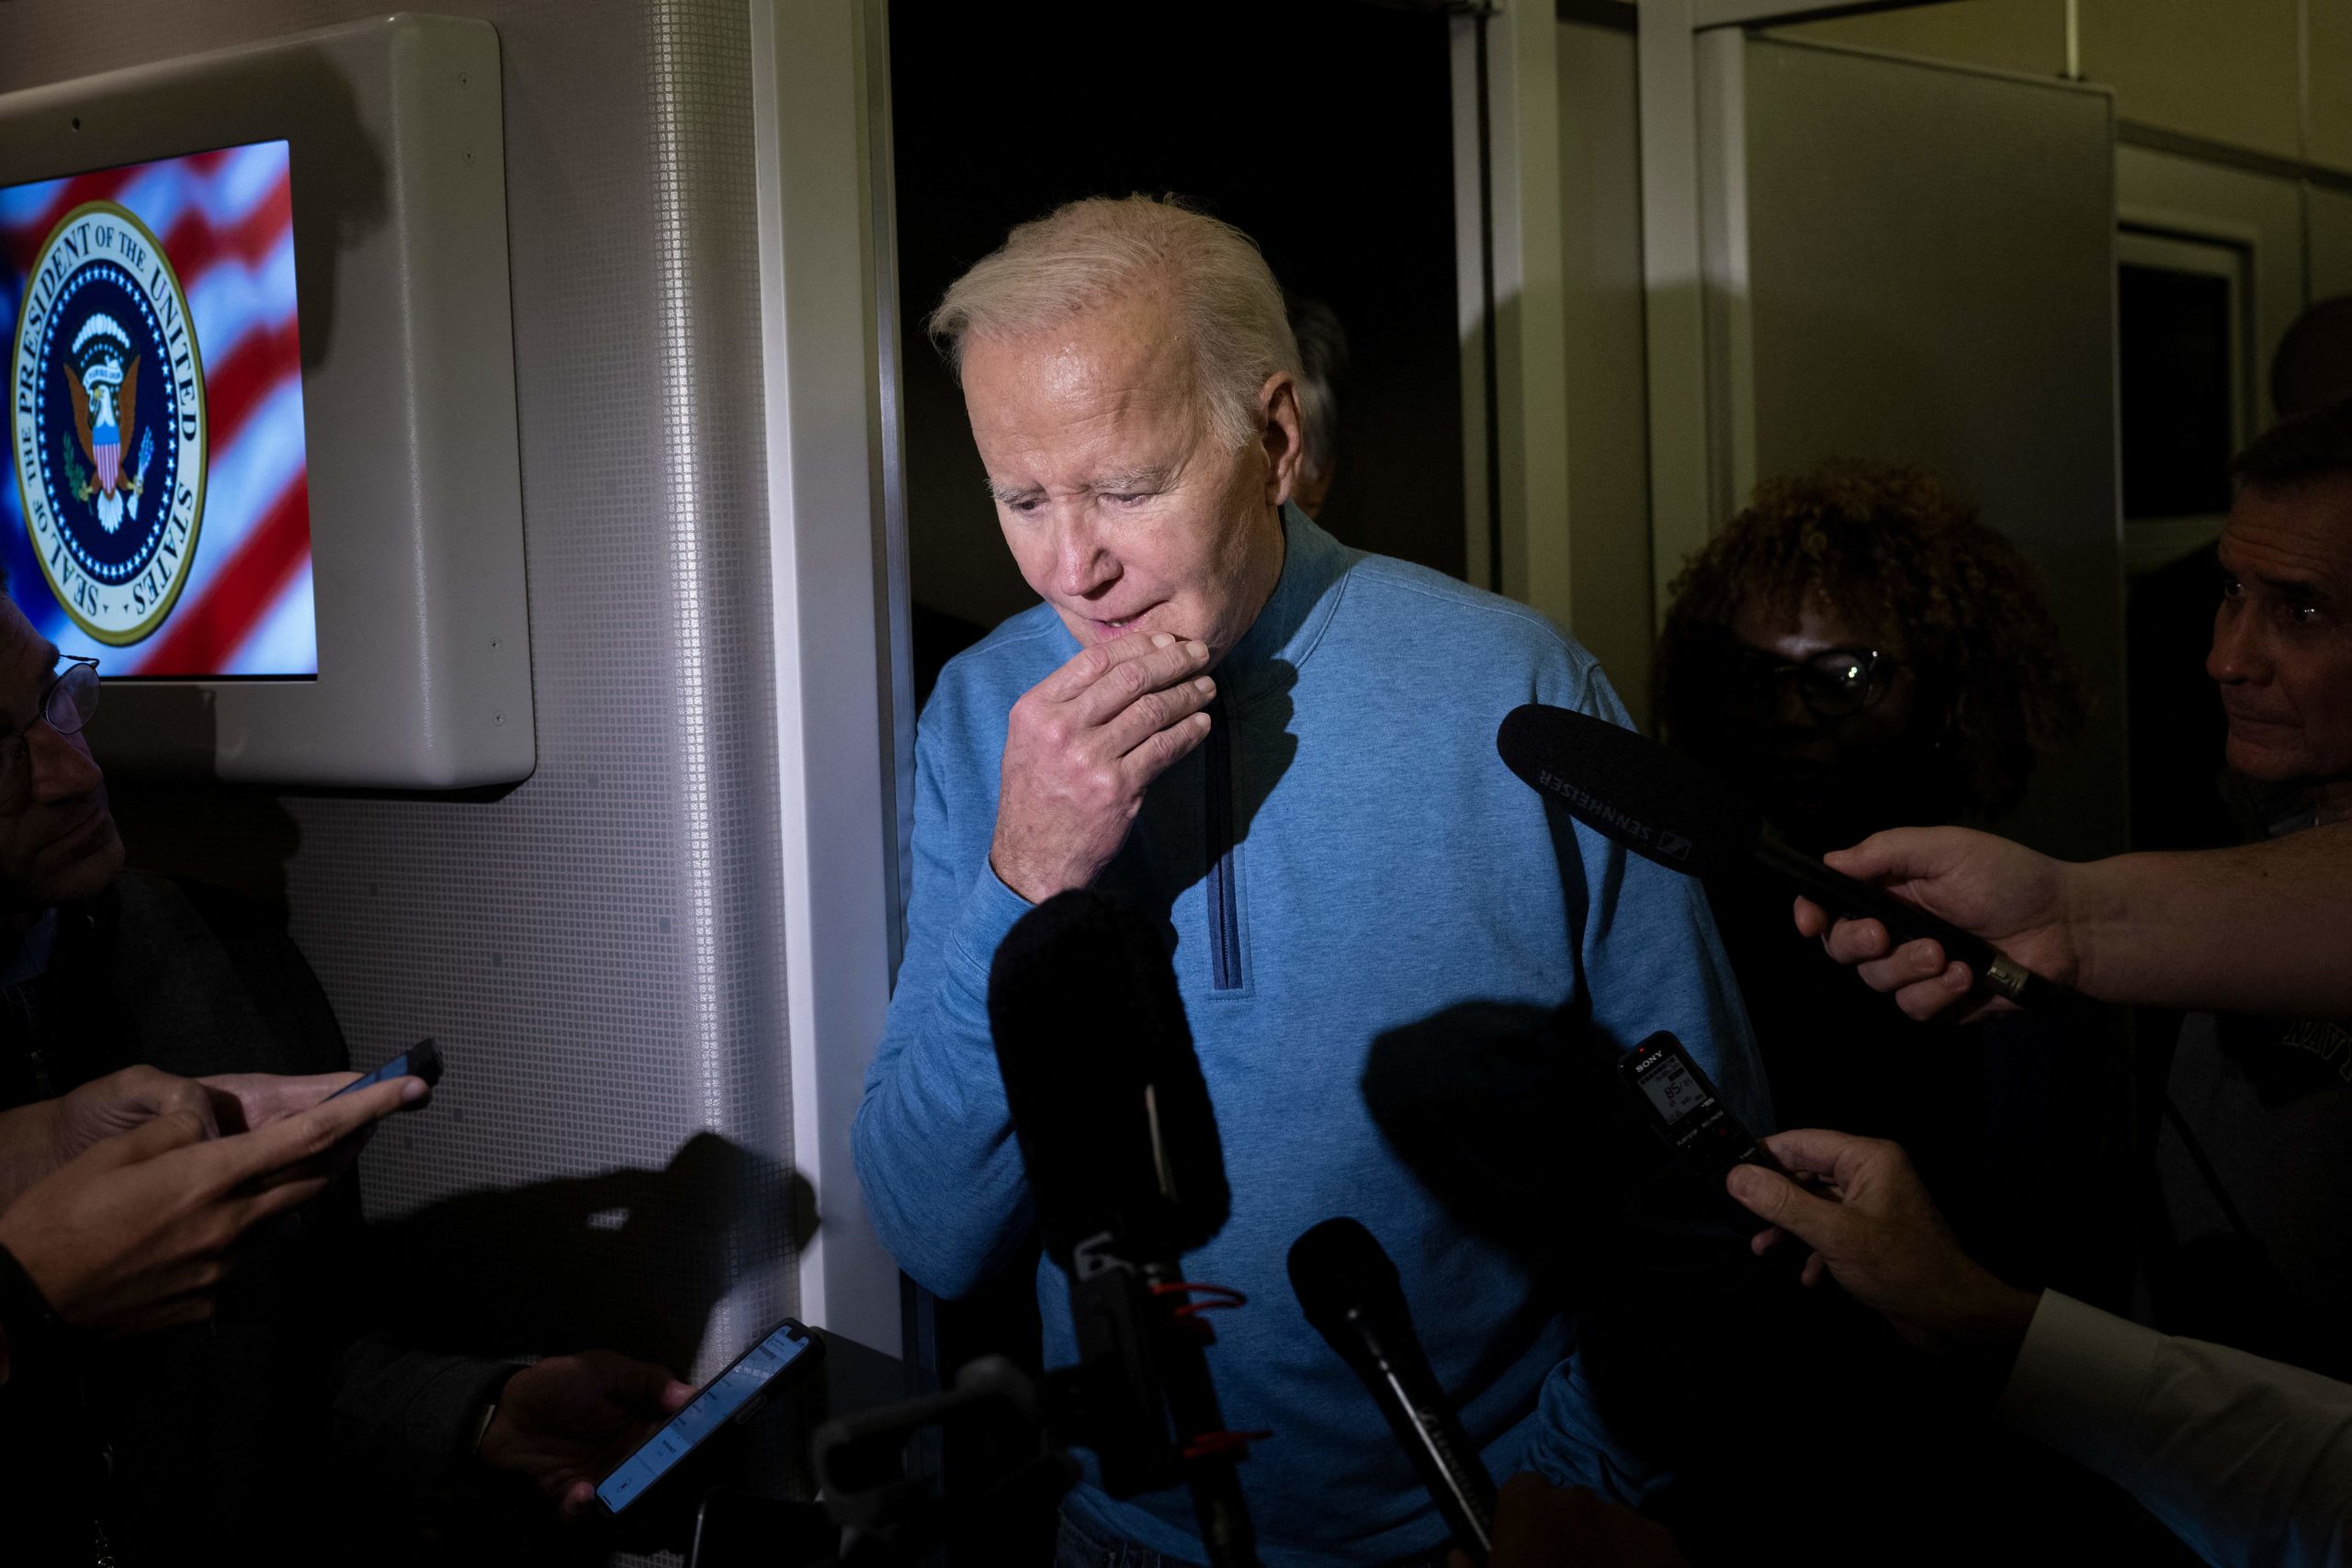 US President Joe Biden speaks to the press aboard Air Force One during a refueling stop at Ramstein Air Base on October 18, 2023 as he returns from a visit to Israel. (Photo by Brendan Smialowski / AFP) (Photo by BRENDAN SMIALOWSKI/AFP via Getty Images)